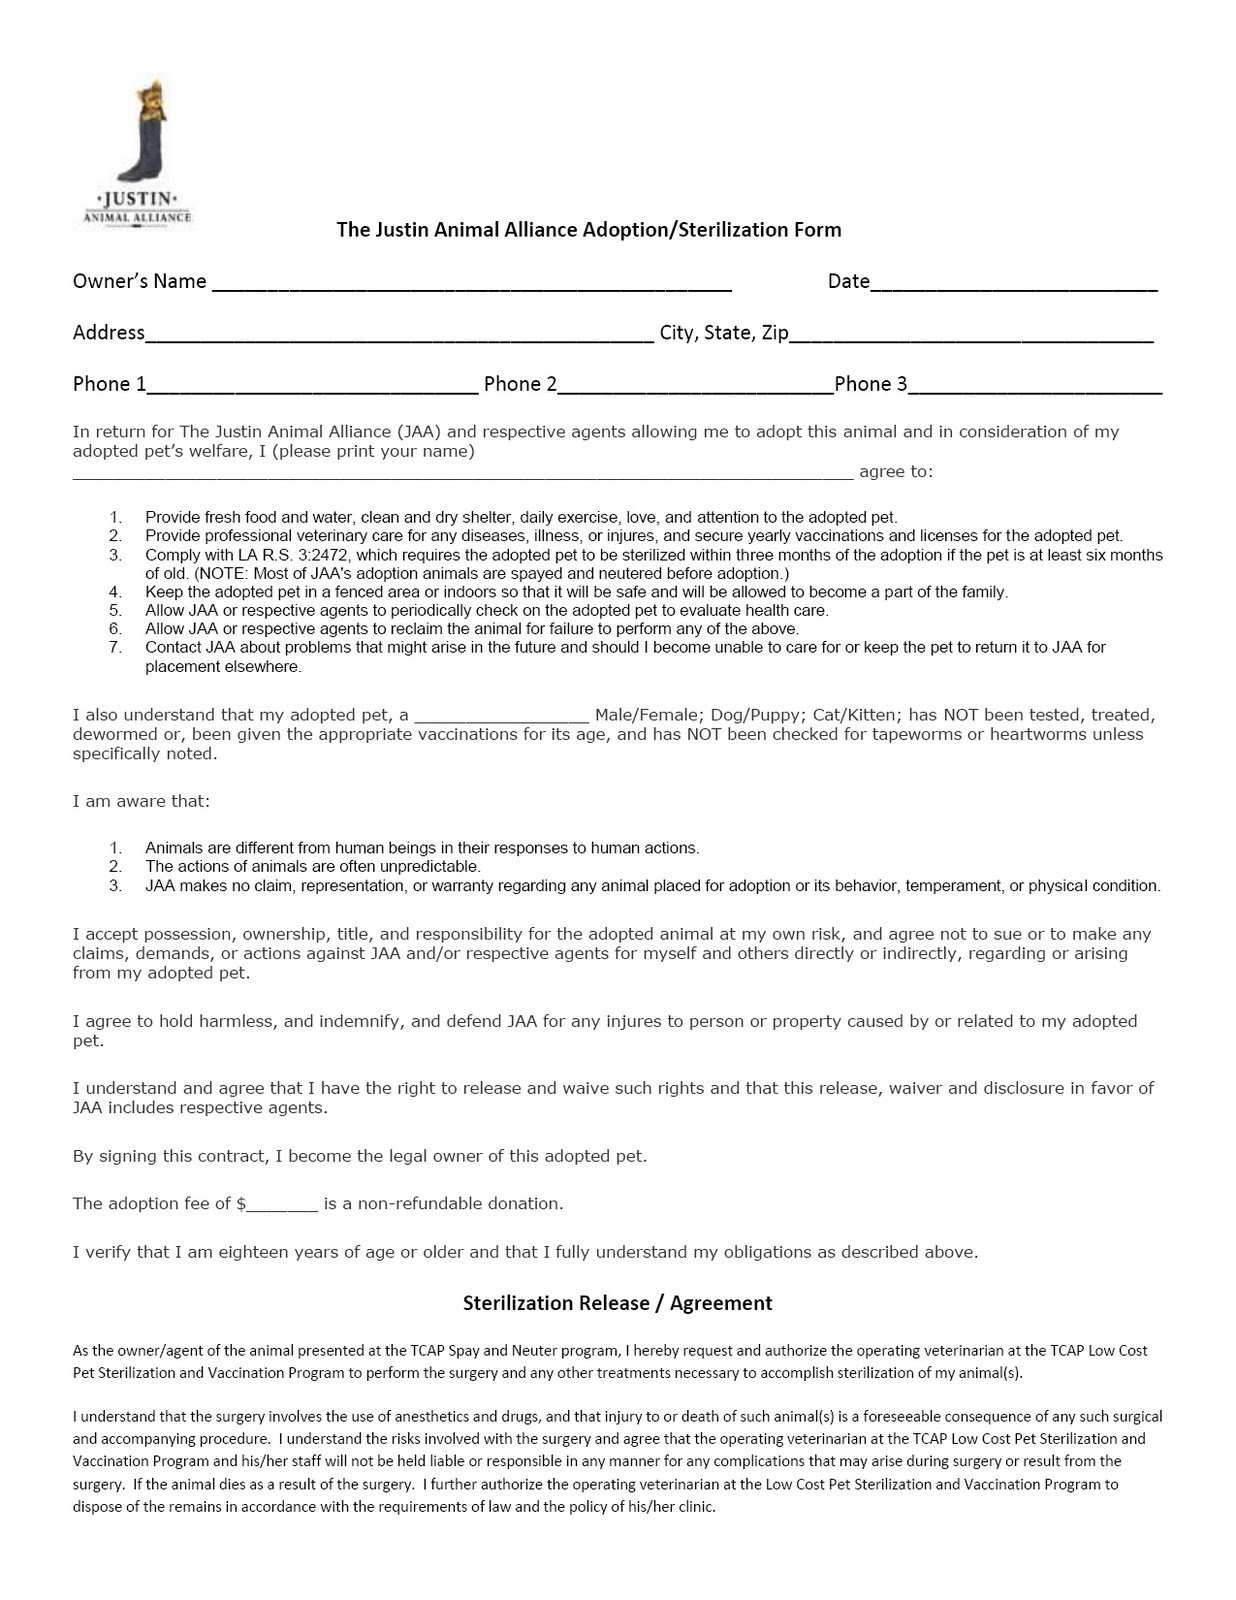 Spay and Neuter Contract Template Spay Neuter Agreement Contract Fast Puppy Application